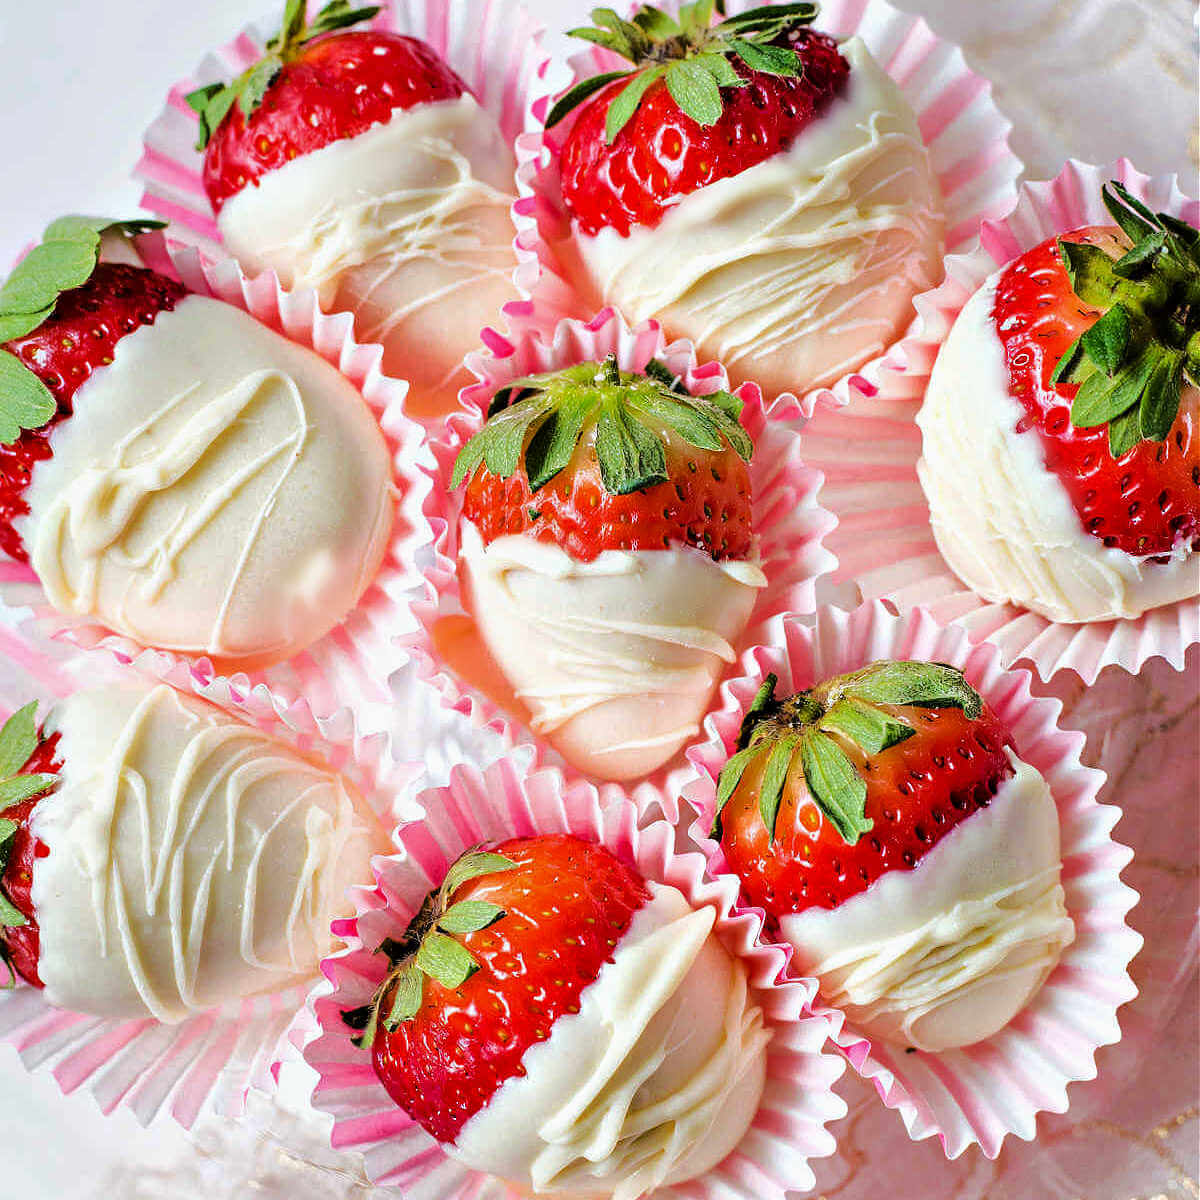 white chocolate covered strawberries in paper wrappers on a glass pedestal plate.